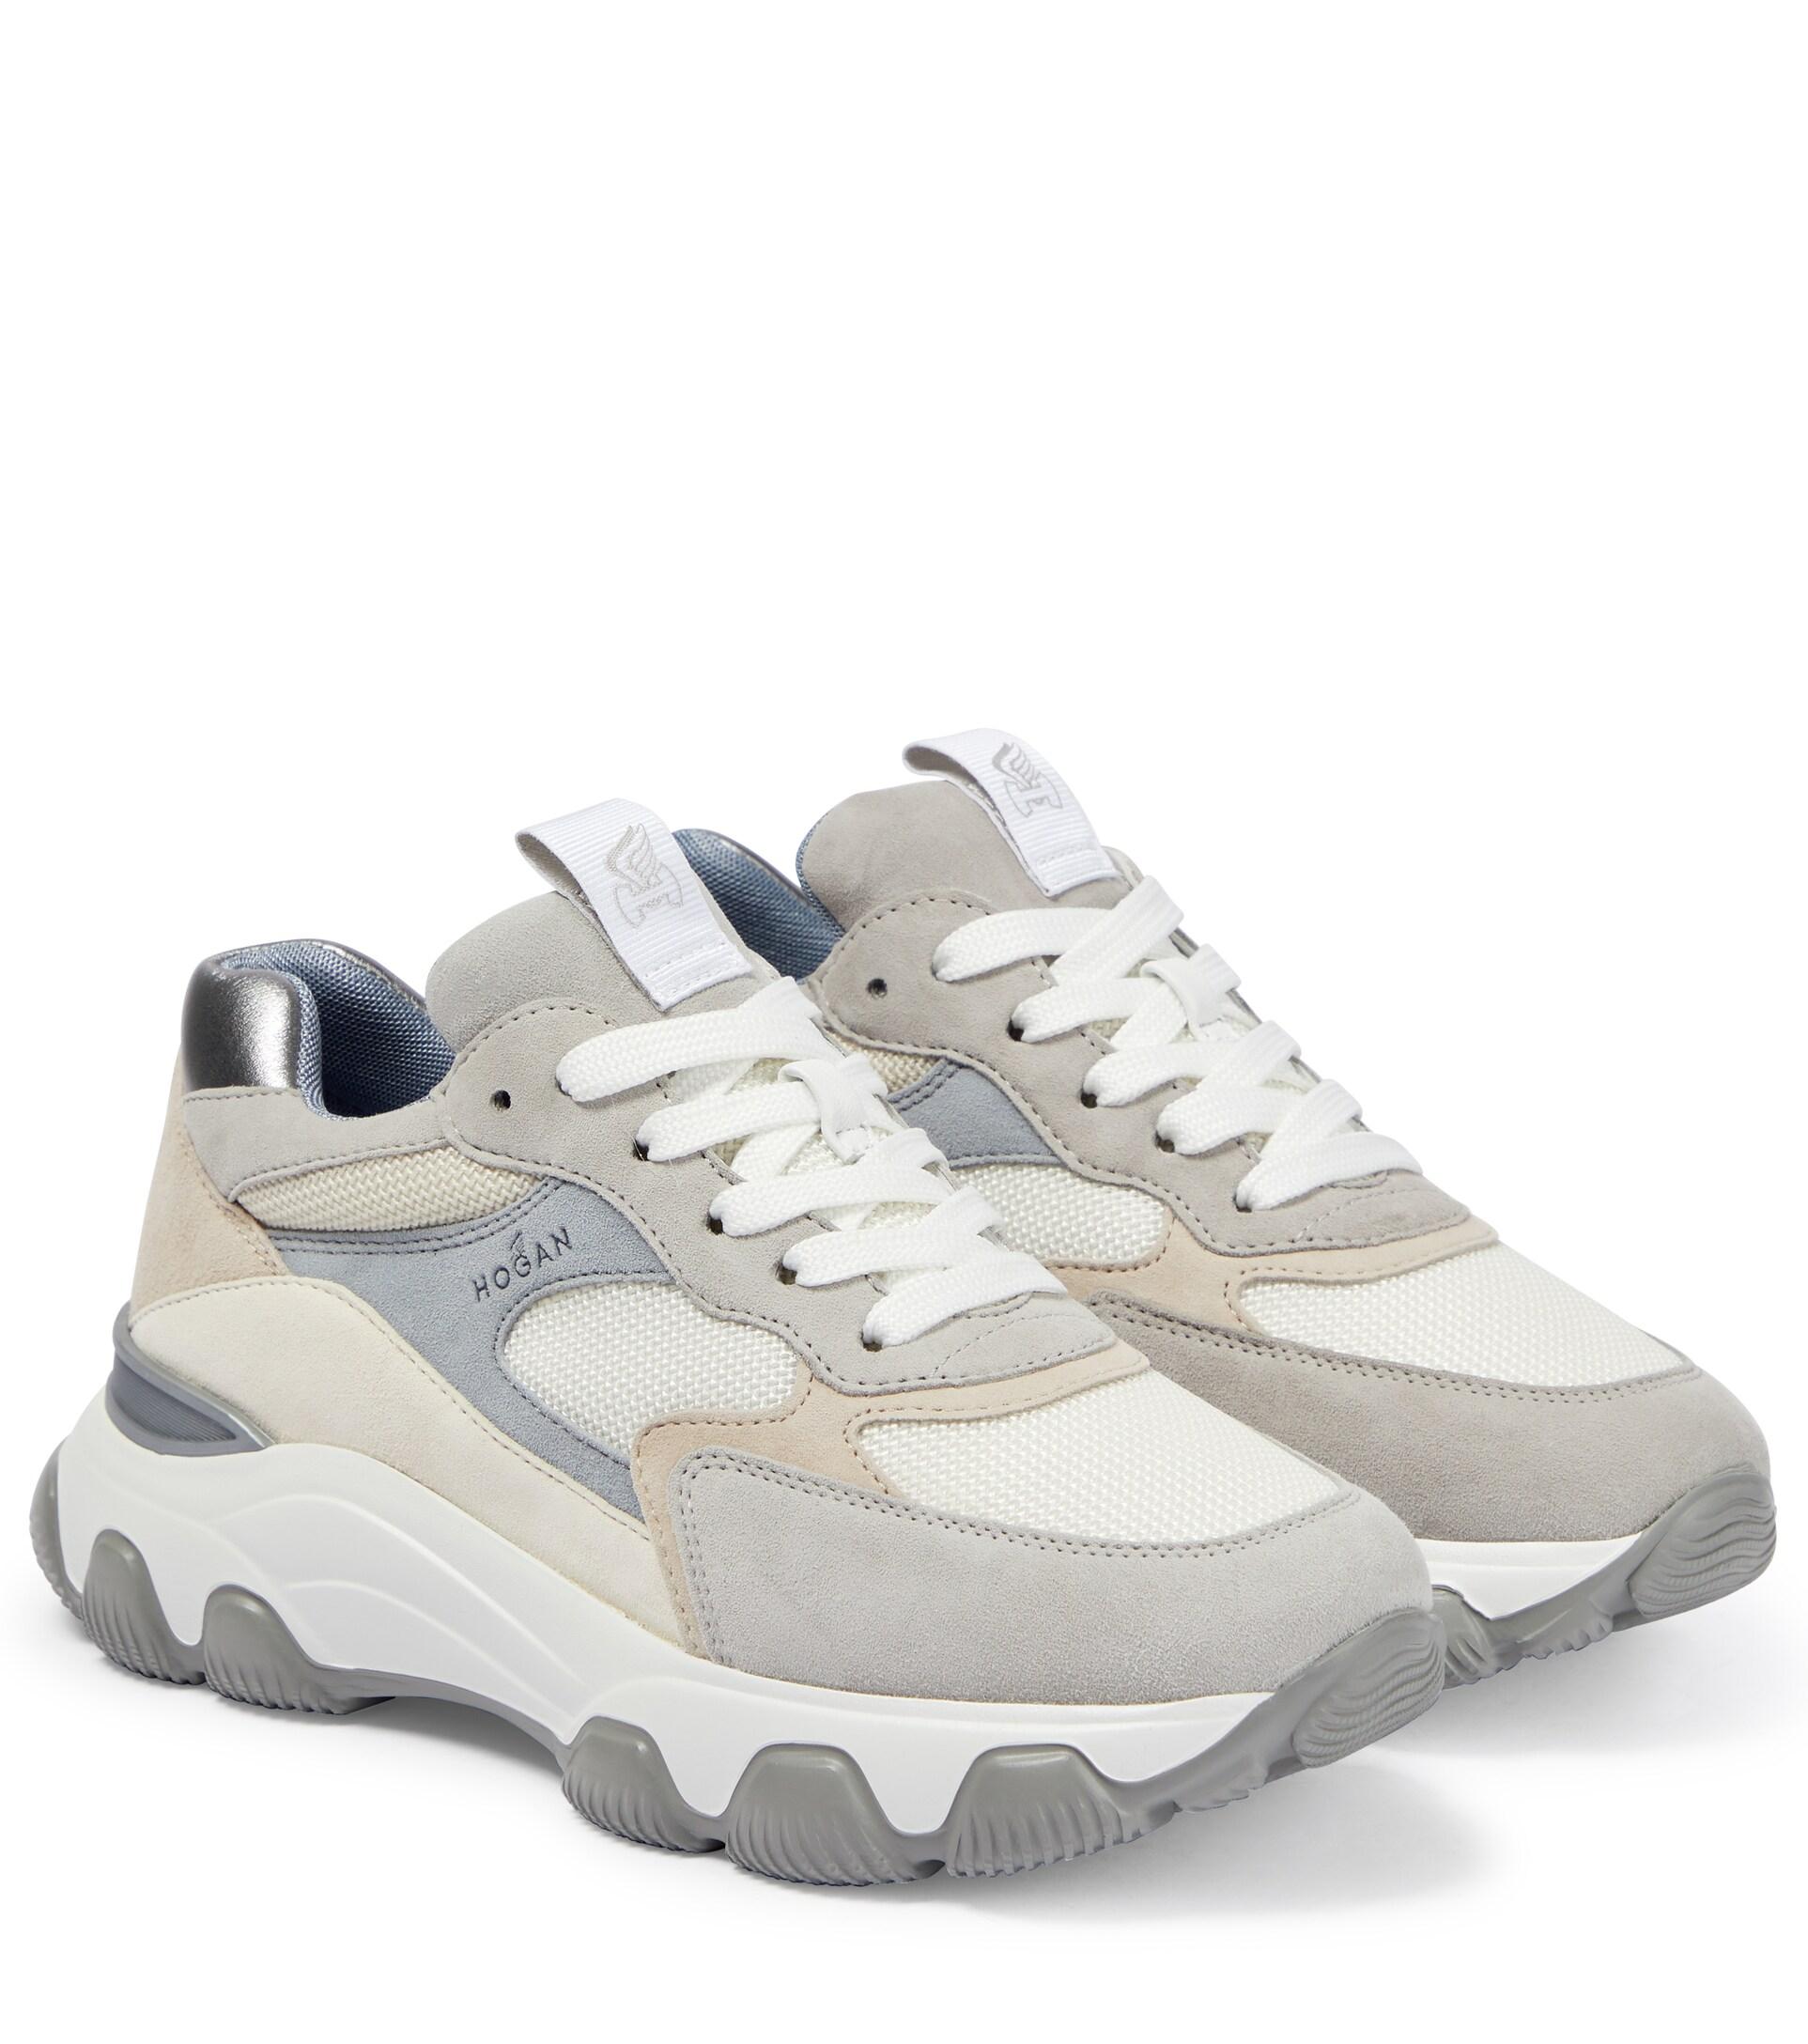 Hogan Hyperactive Leather And Suede Sneakers in White | Lyst